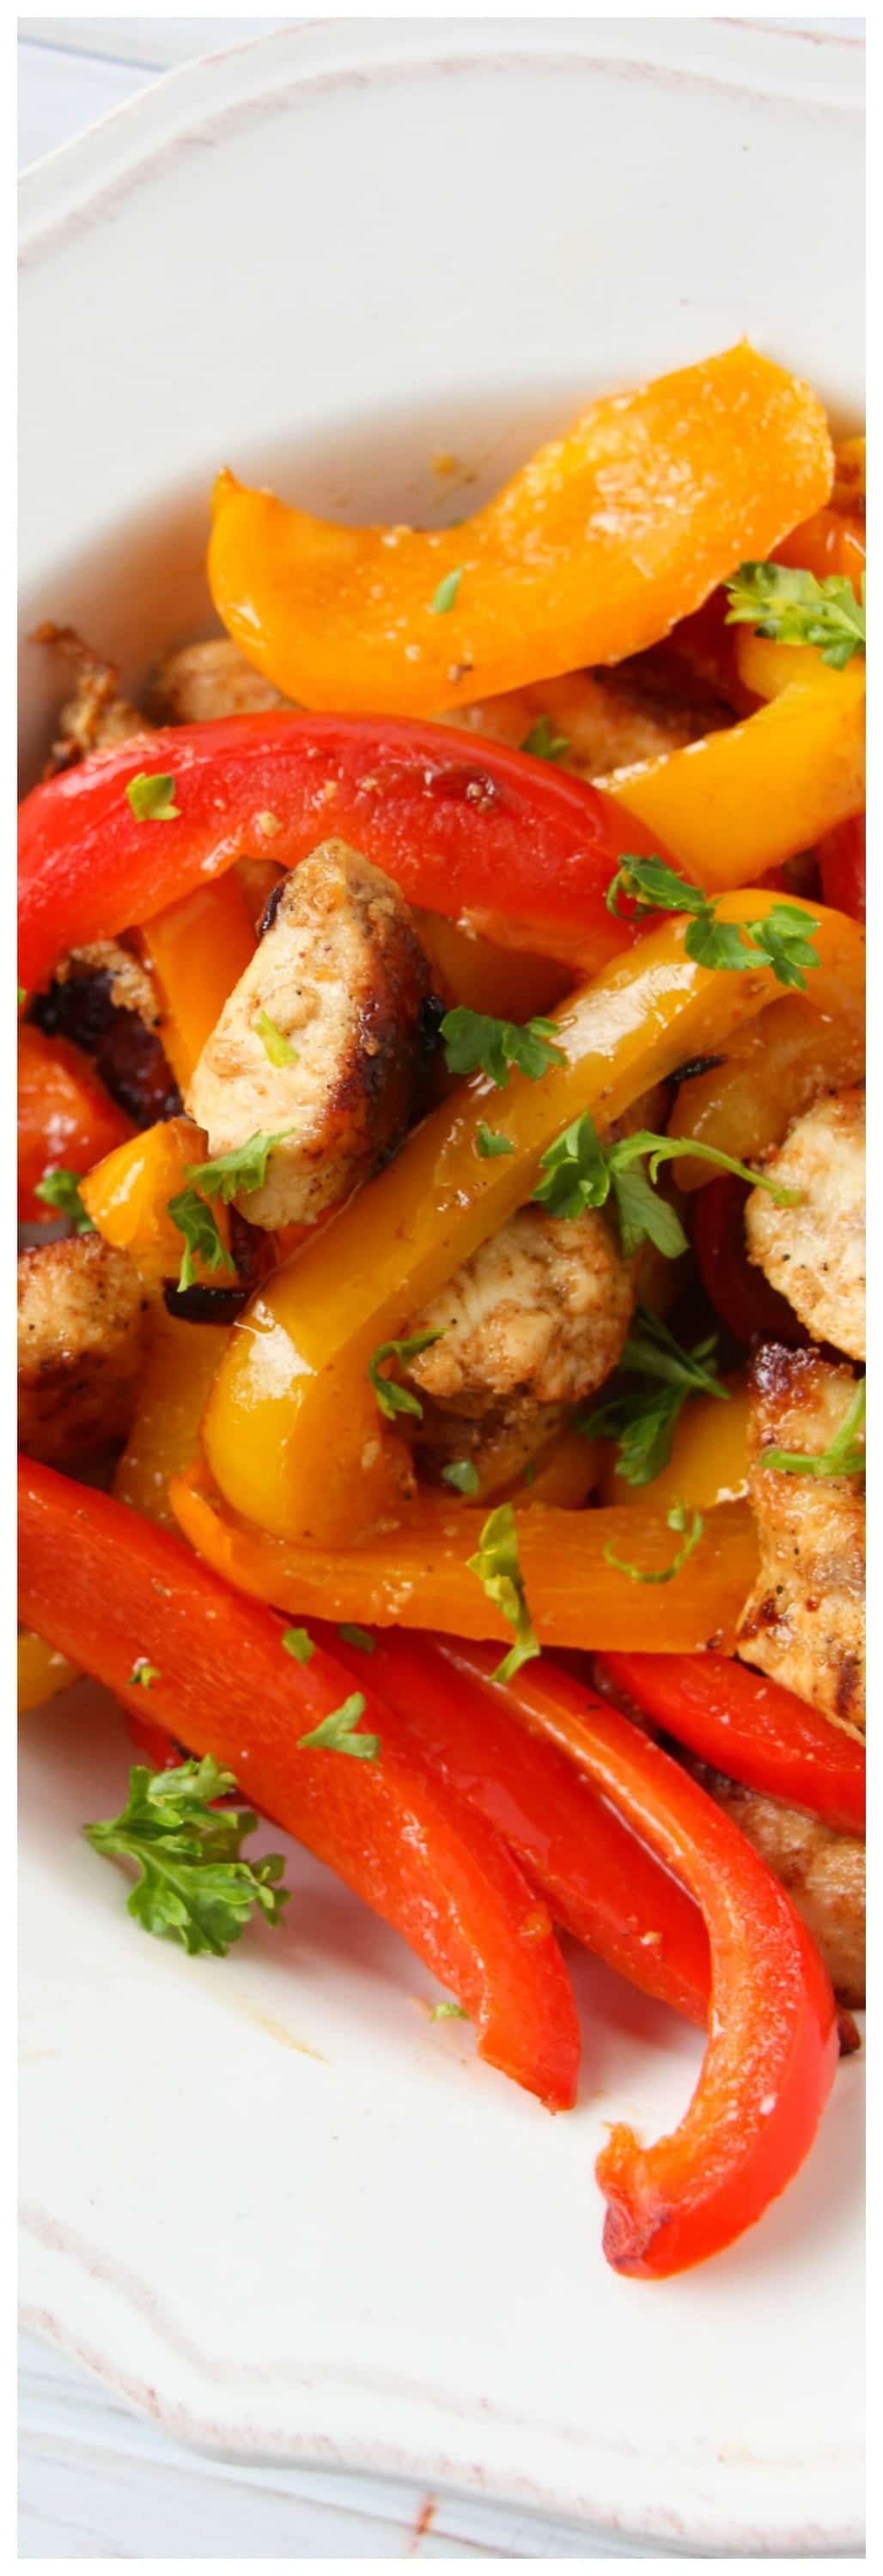 Delicious simple chicken fajita recipe! In under 20 minutes, these perfectly seasoned chickens pair well with veggies for a dinner everyone will love. Without shell, carb free and 21 day fix approved